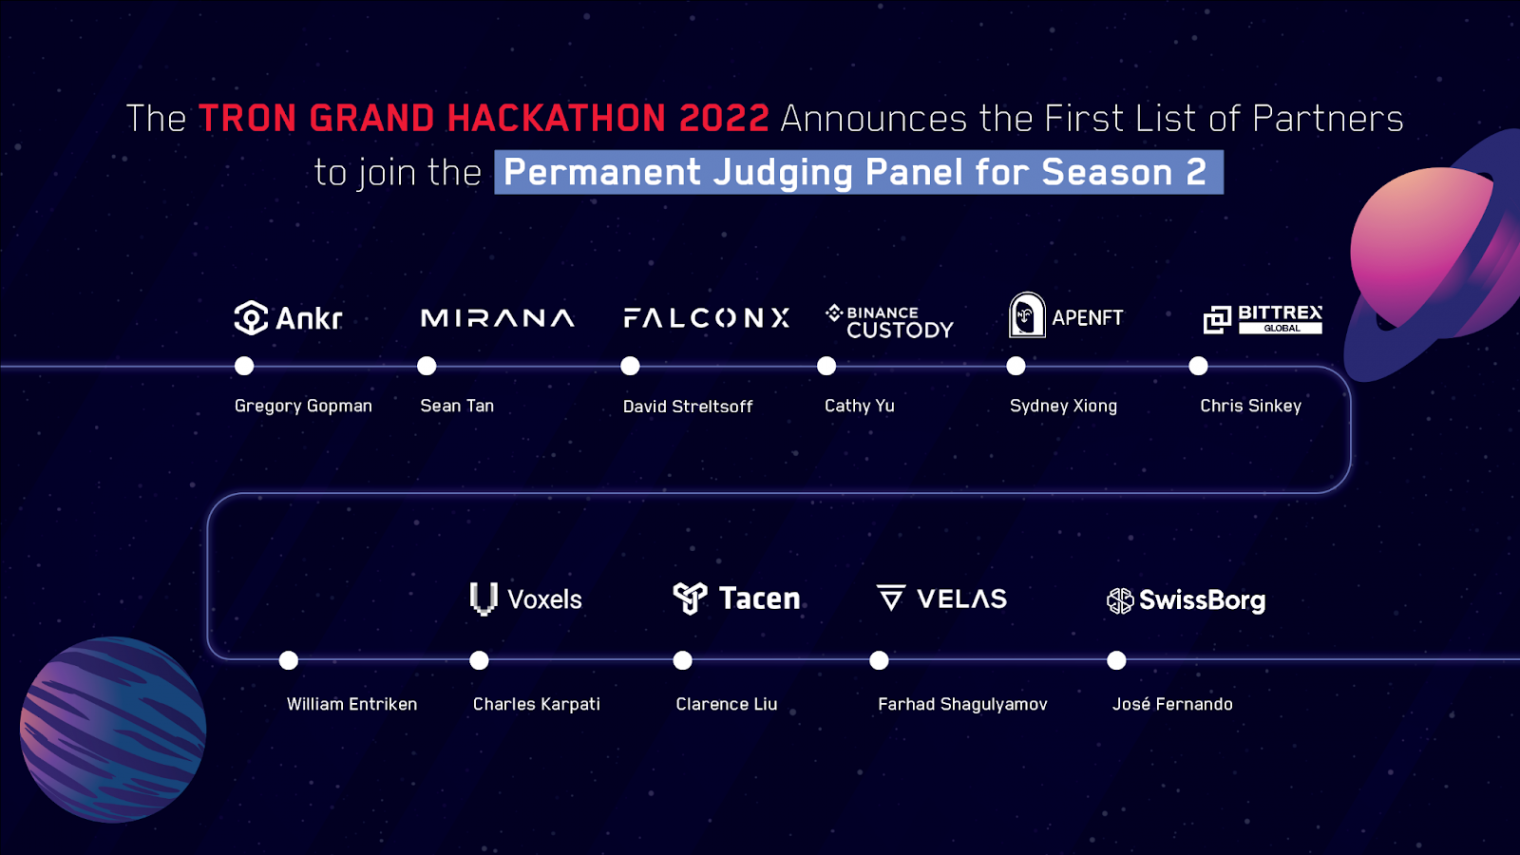 The TRON Grand Hackathon 2022 Announces First List of New Partners Joining the Permanent Judging Panel for Season 2